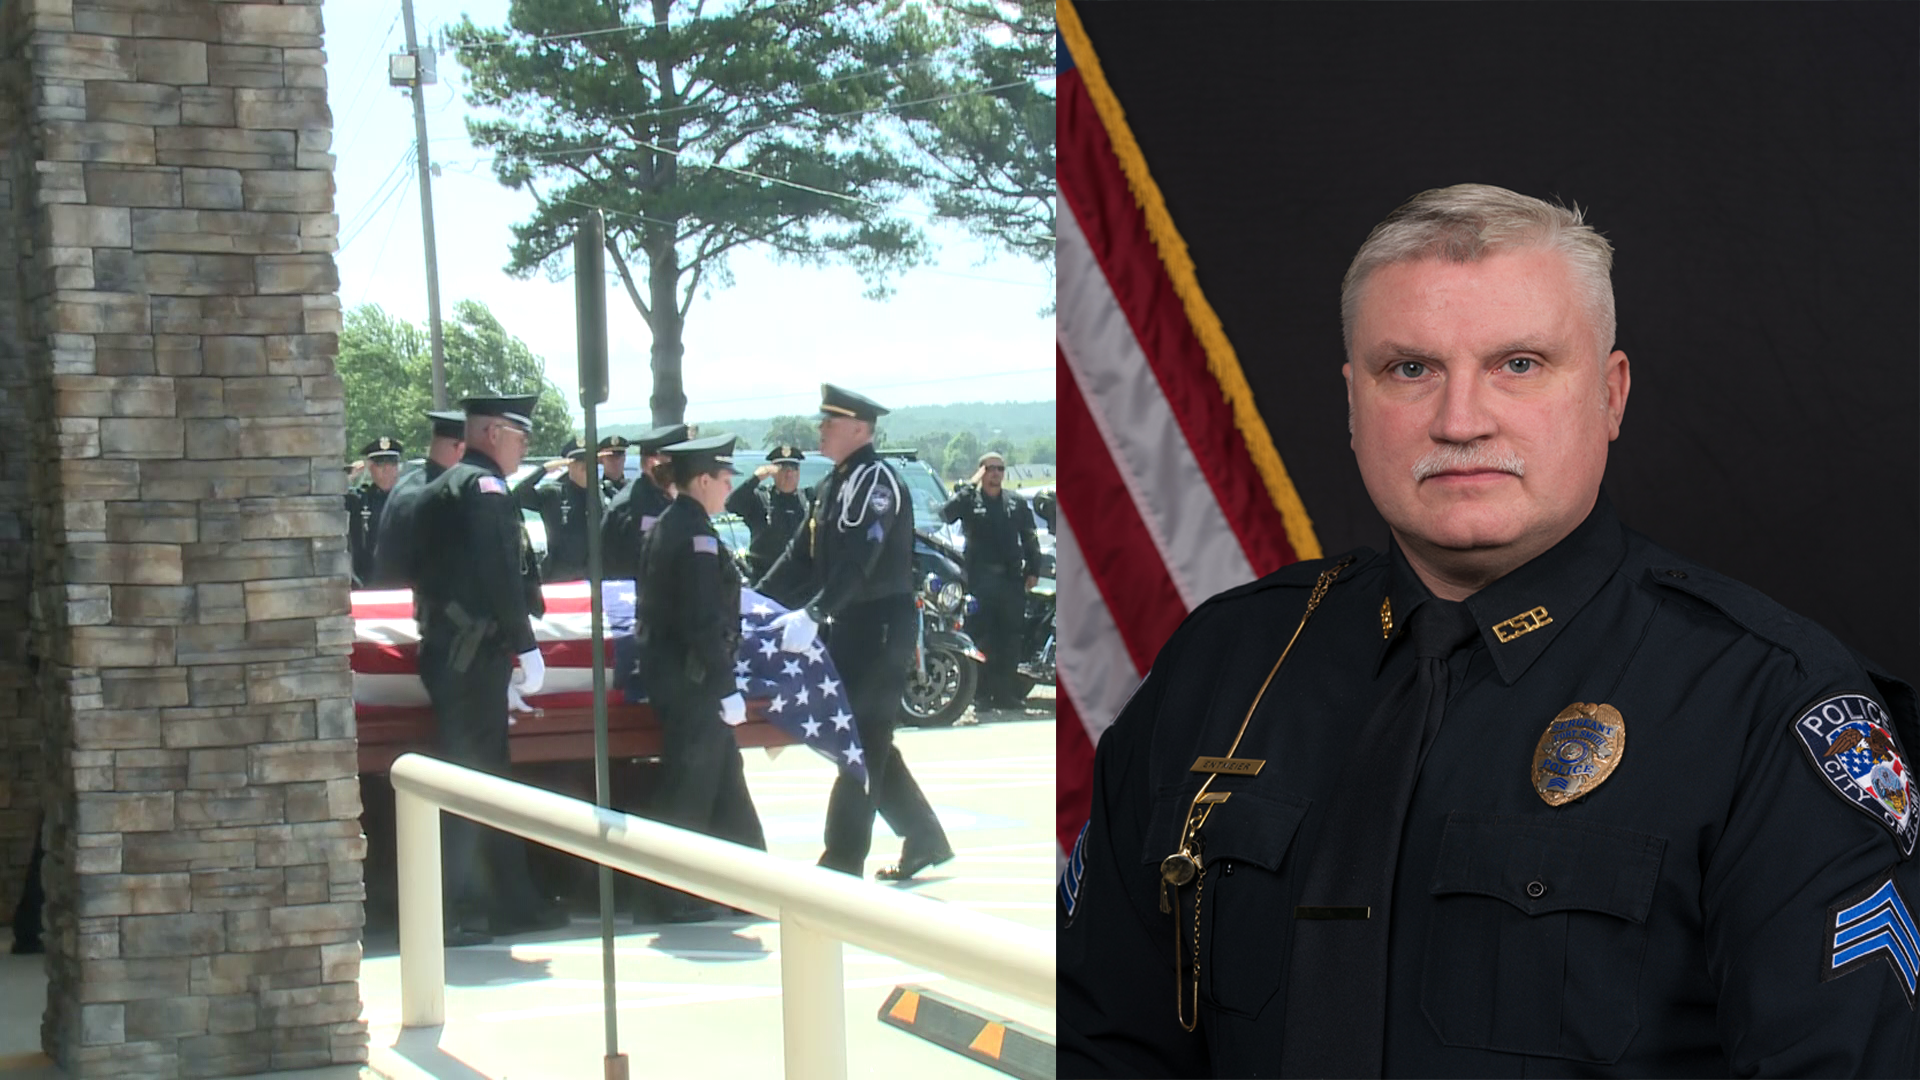 On Friday, community members came together to honor the life of a fallen hero. Fort Smith Police Sergeant Rick Entmeier was laid to rest.